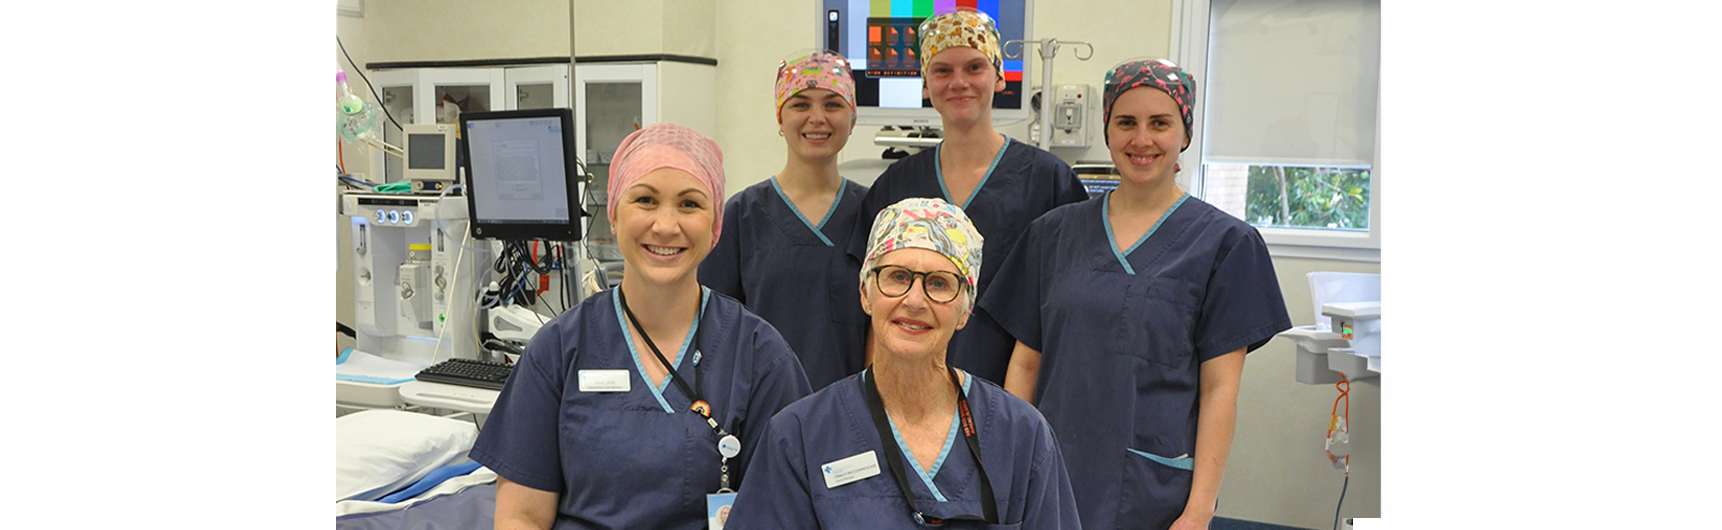 Southern Cross Healthcare wholly owned Auckland Surgical Centre team members, front left to right are Education Lead Sara Jane Lines and Theatre Services Manager Tracy McConnochie. Back left to right are new Theatre Nurses Brittany Ruddenklau, Brooke Milham and Celia Chambers, who have recently completed Periop 101